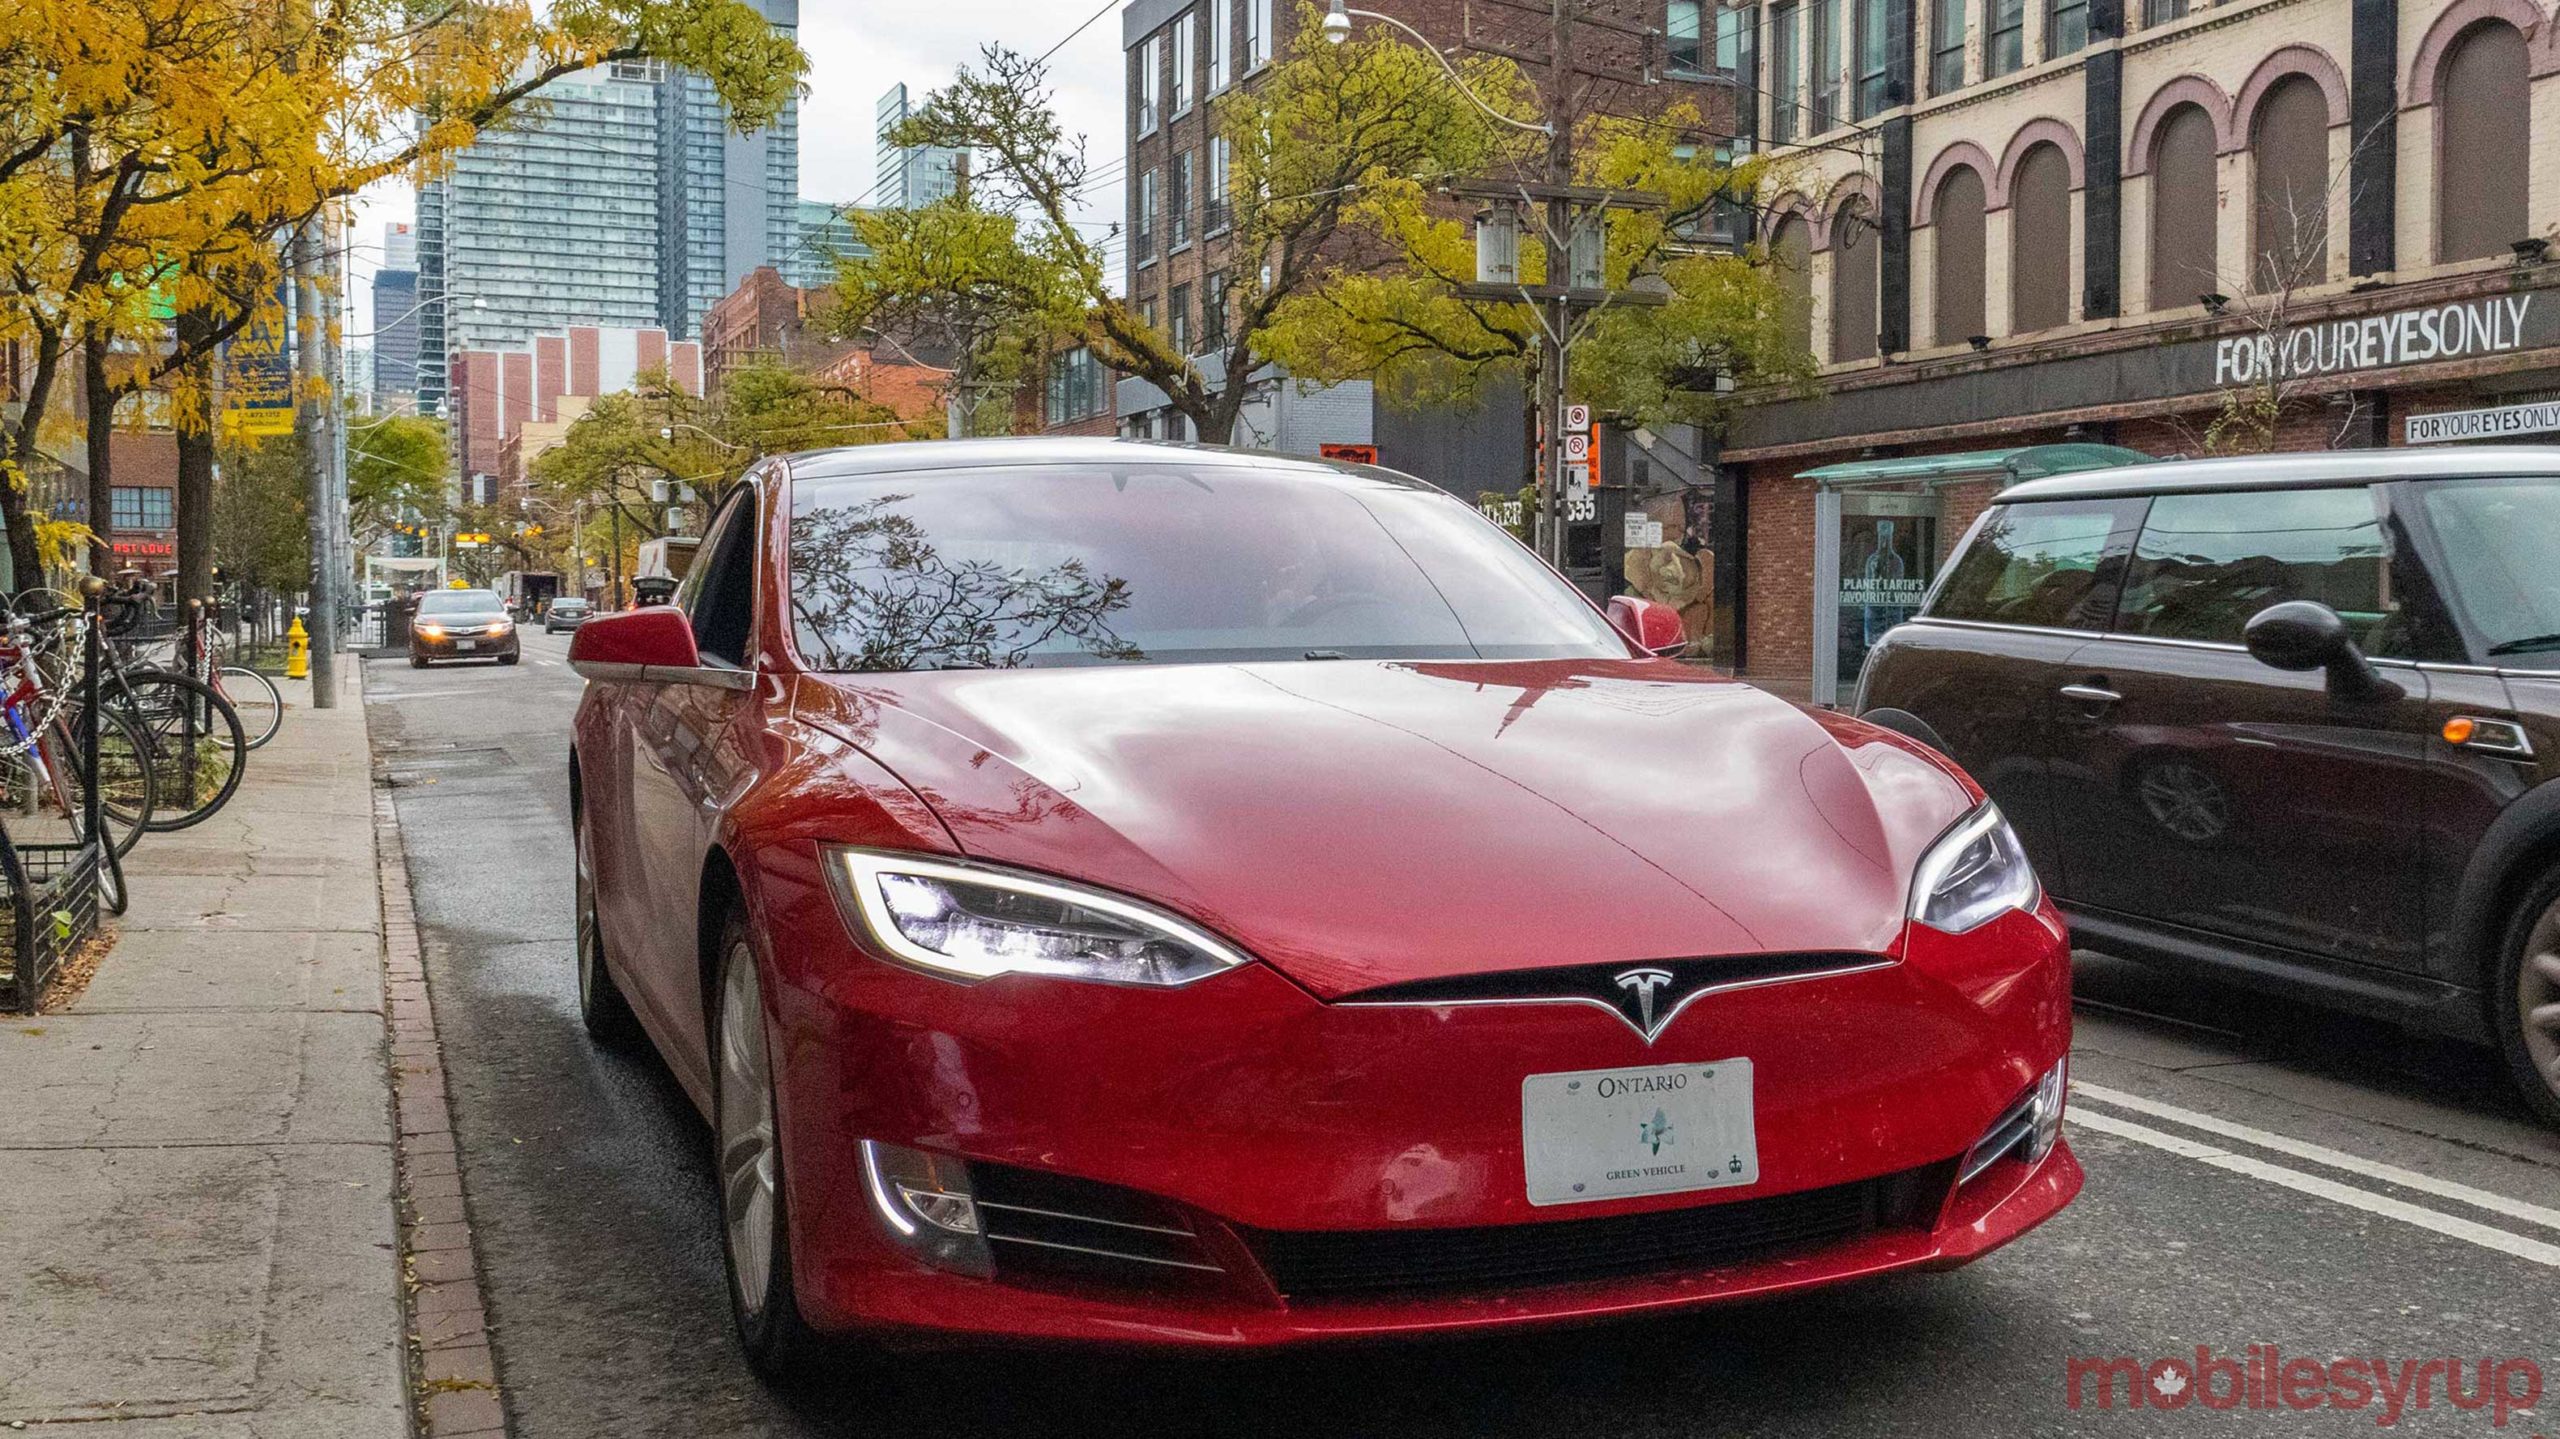 Quebec electric vehicle rebate likely to continue past 2021